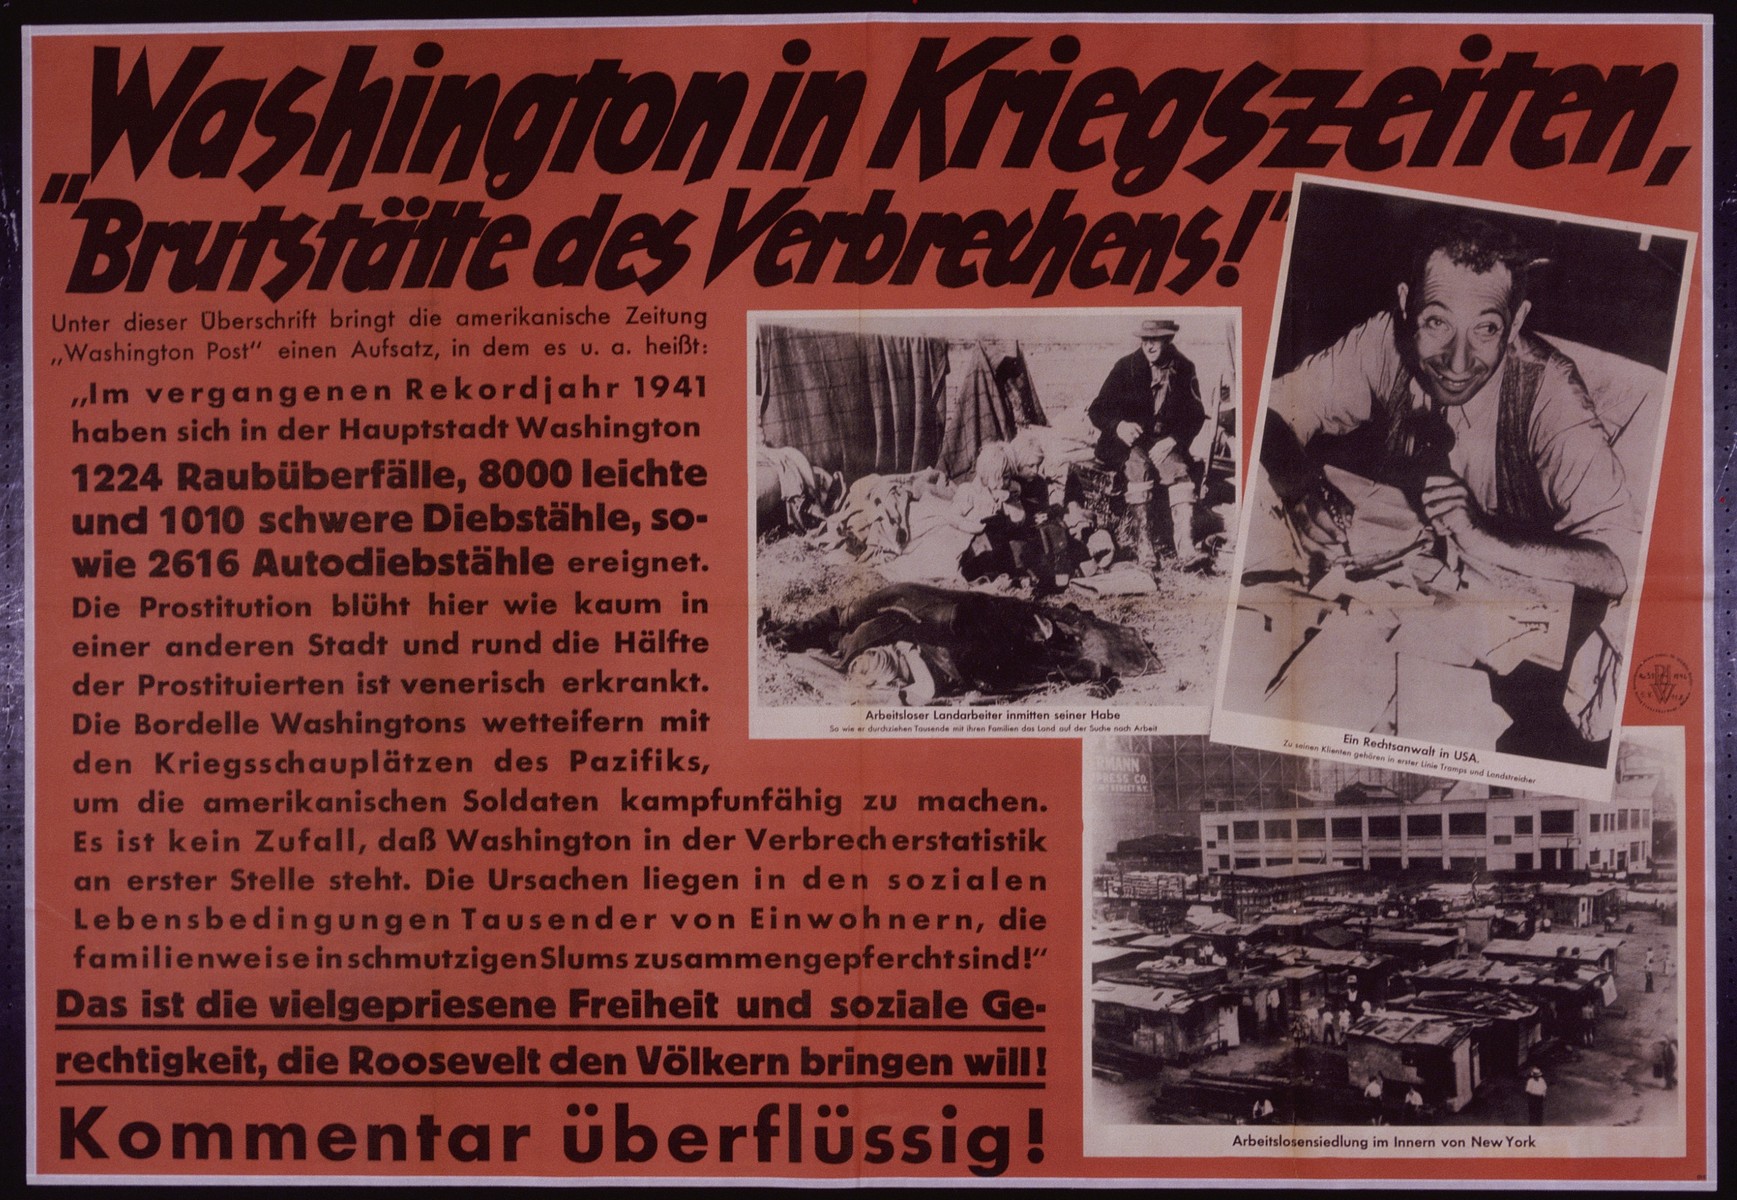 Nazi propaganda poster entitled "Washington in Kriegzeiten," issued by the "Parole der Woche," a wall newspaper (Wandzeitung) published by the National Socialist Party propaganda office in Munich.

 "Hotbed of Crime": Washington in War Time!
Under this headline the American newspaper, the "Washington Post" published an essay in which they state, among other things, the following:
"In the past record year 1941 the capitol city of Washington has had 1224 cases of rape, 8000 minor and 1010 major cases of theft and 2616 cases of car theft. Prostitution flourishes here unlike in almost any other city and roughly half of the prostitutes suffer from venereal diseases. The brothels of Washington vie with the war scenes of the Pacific in incapacitating American Soldiers.  It is no coincidence that Washington ranks first in statistics on crime.  The reason lies with the social living conditions of thousands of residents, who as families are forced to be crowded into filthy slums!"
This is the much praised freedom and social equality that Roosevelt wants to bring to the people!
Any Commentary would be Redundant!